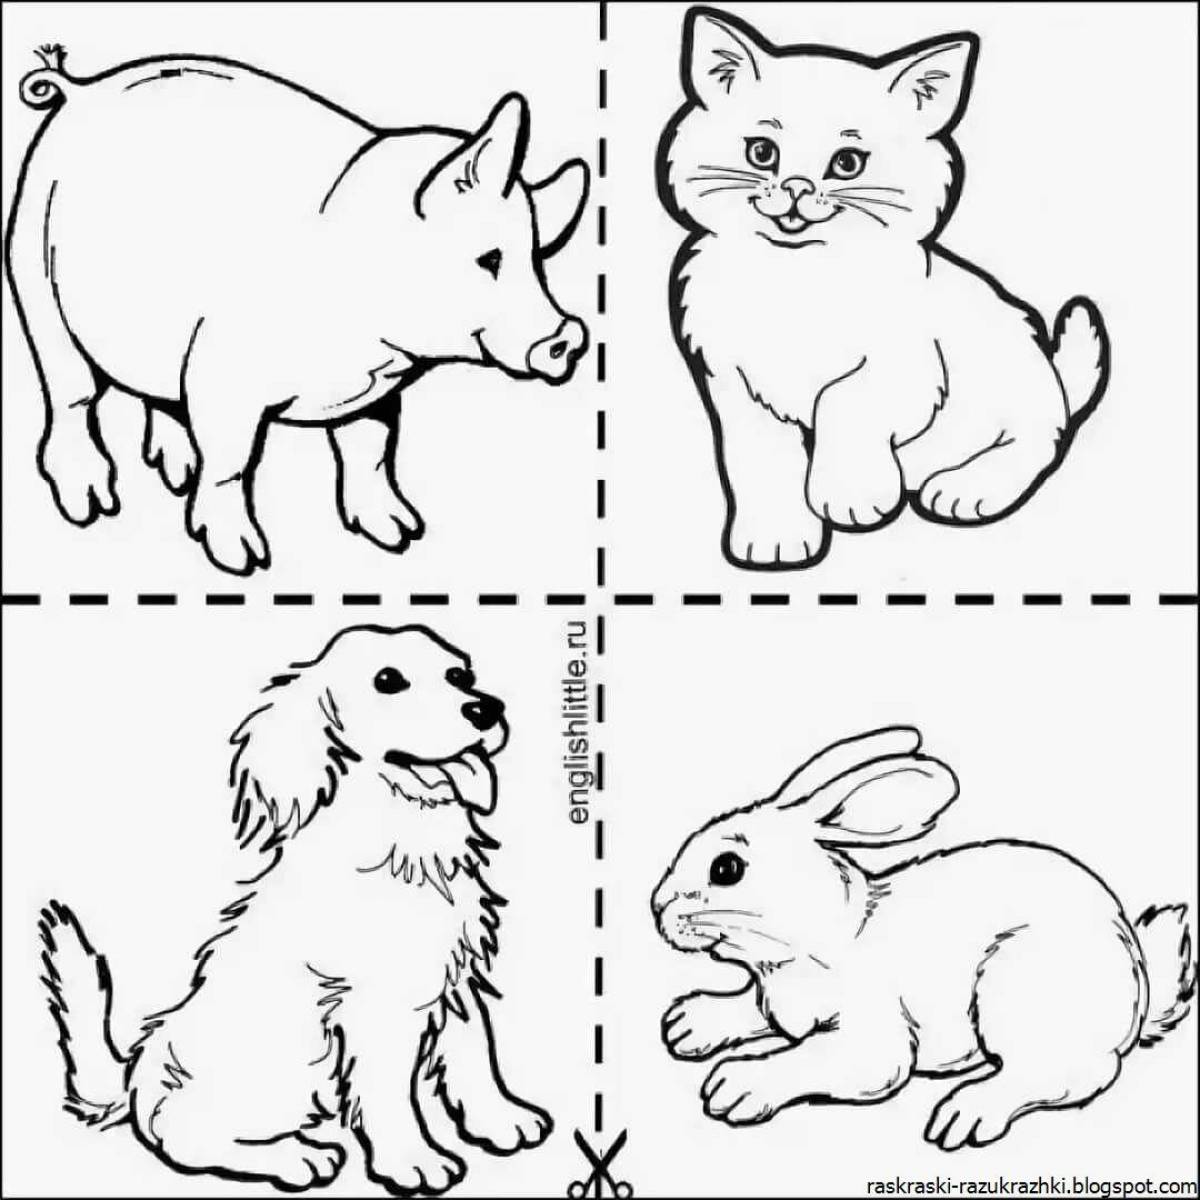 Amazing pet coloring pages for kids 5-7 years old